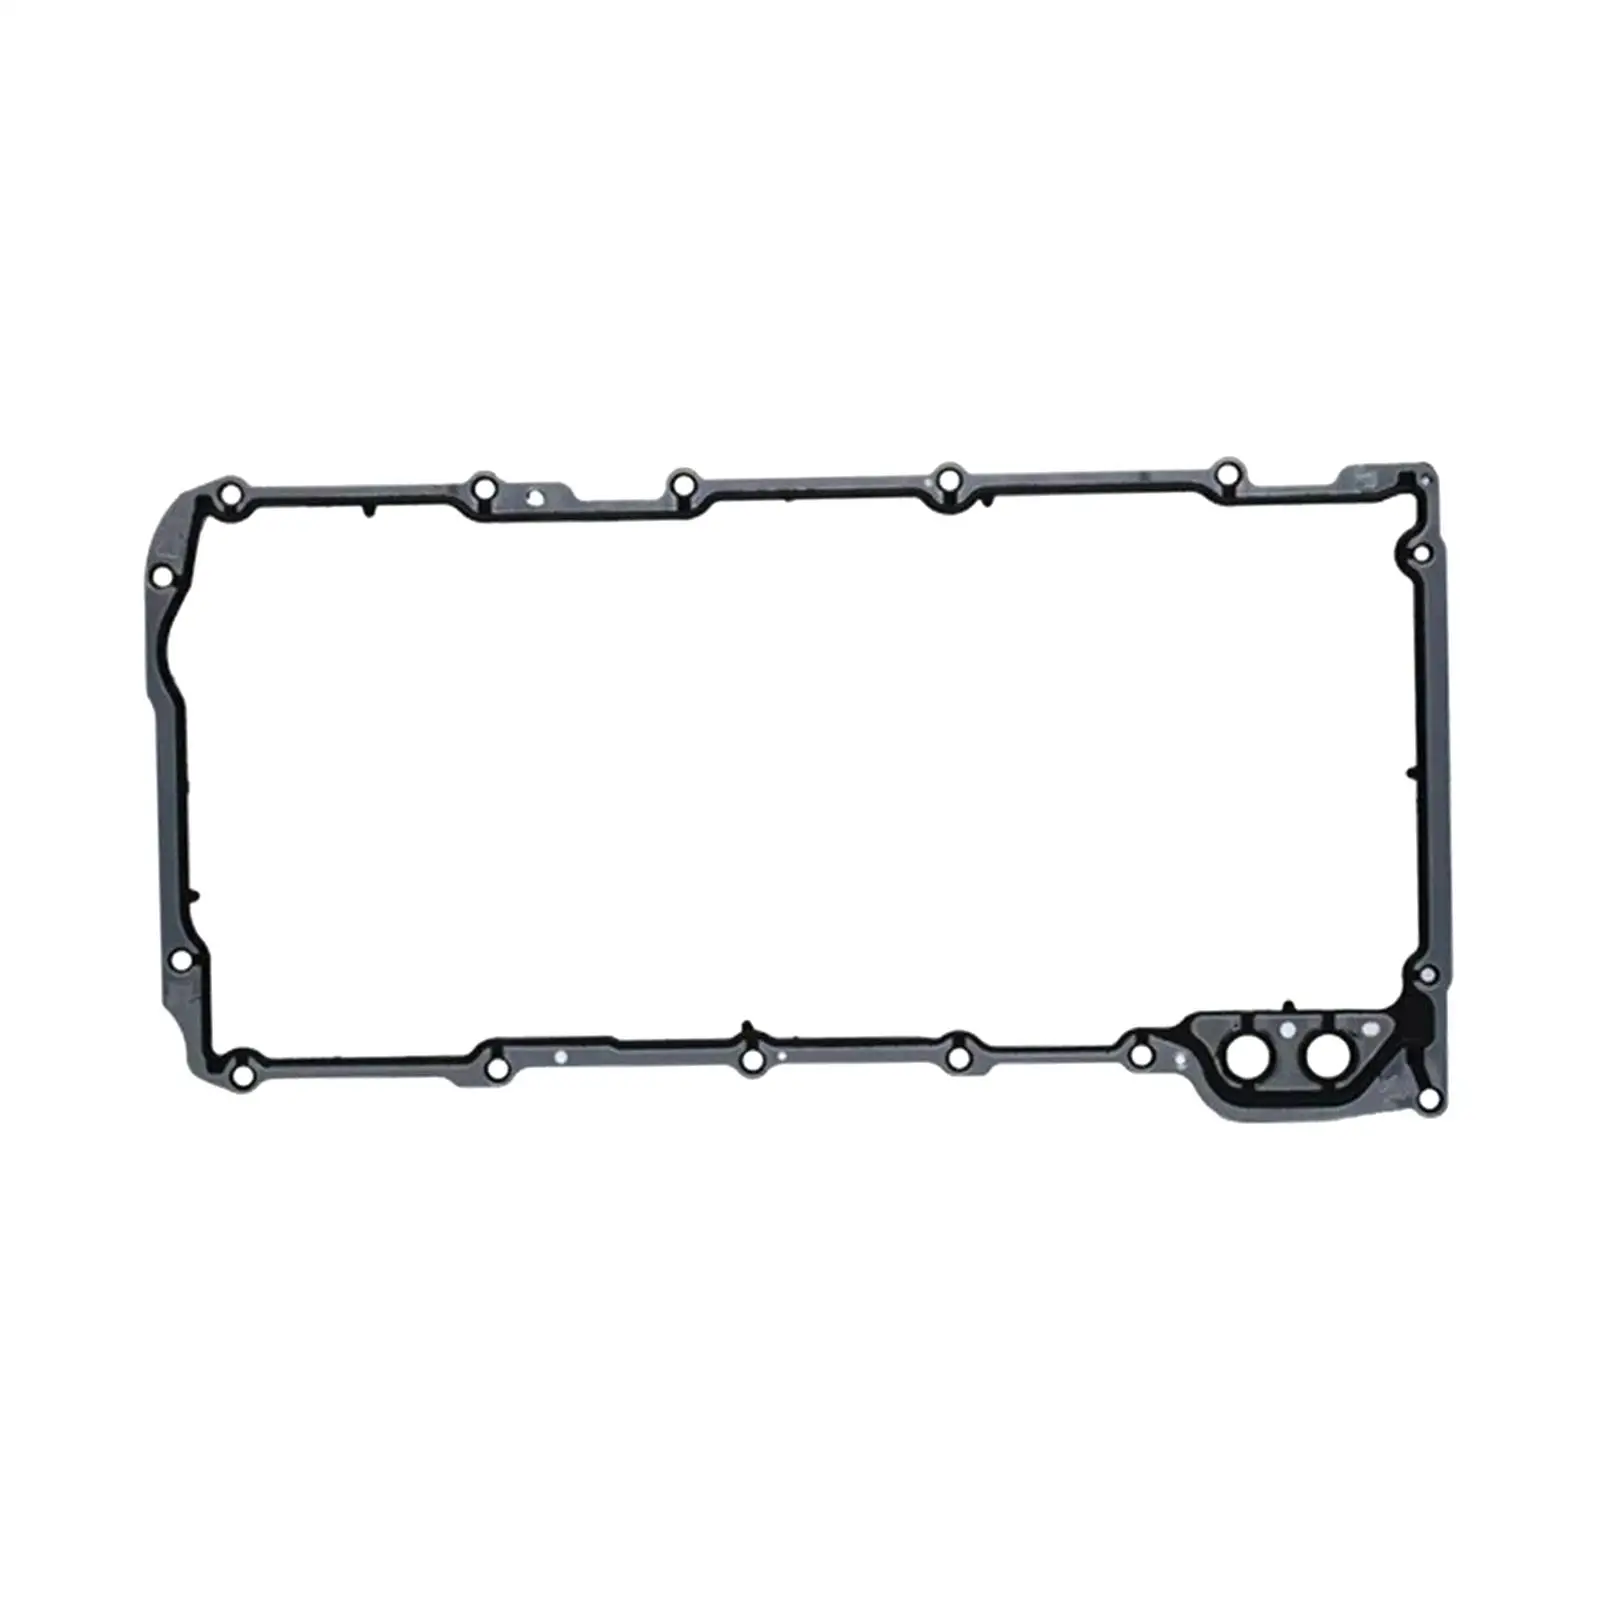 Cylinder Engine Oil Pan Gasket for Hummer Easy to Install Premium